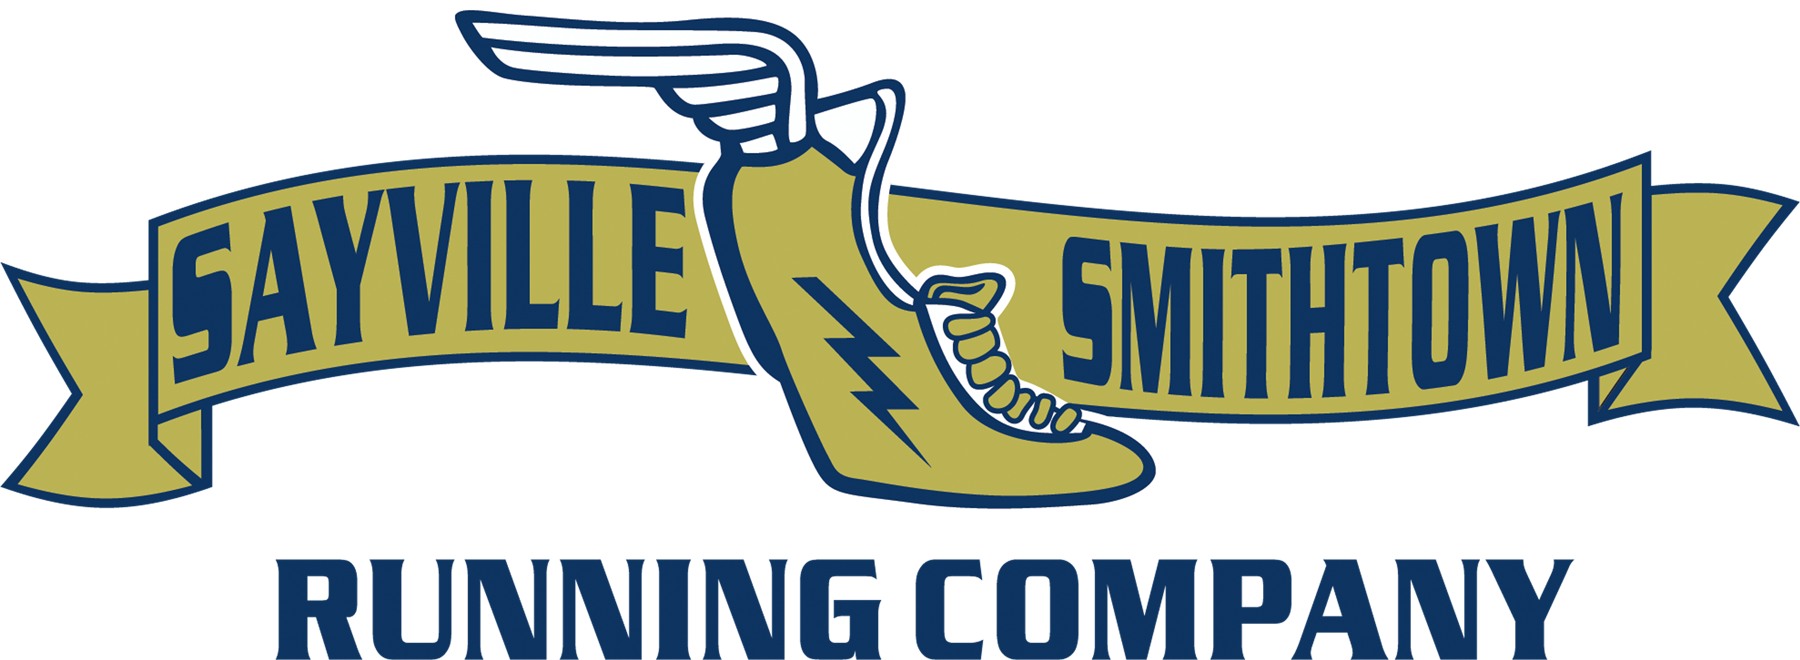 Welcome to Sayville Smithtown Running Co